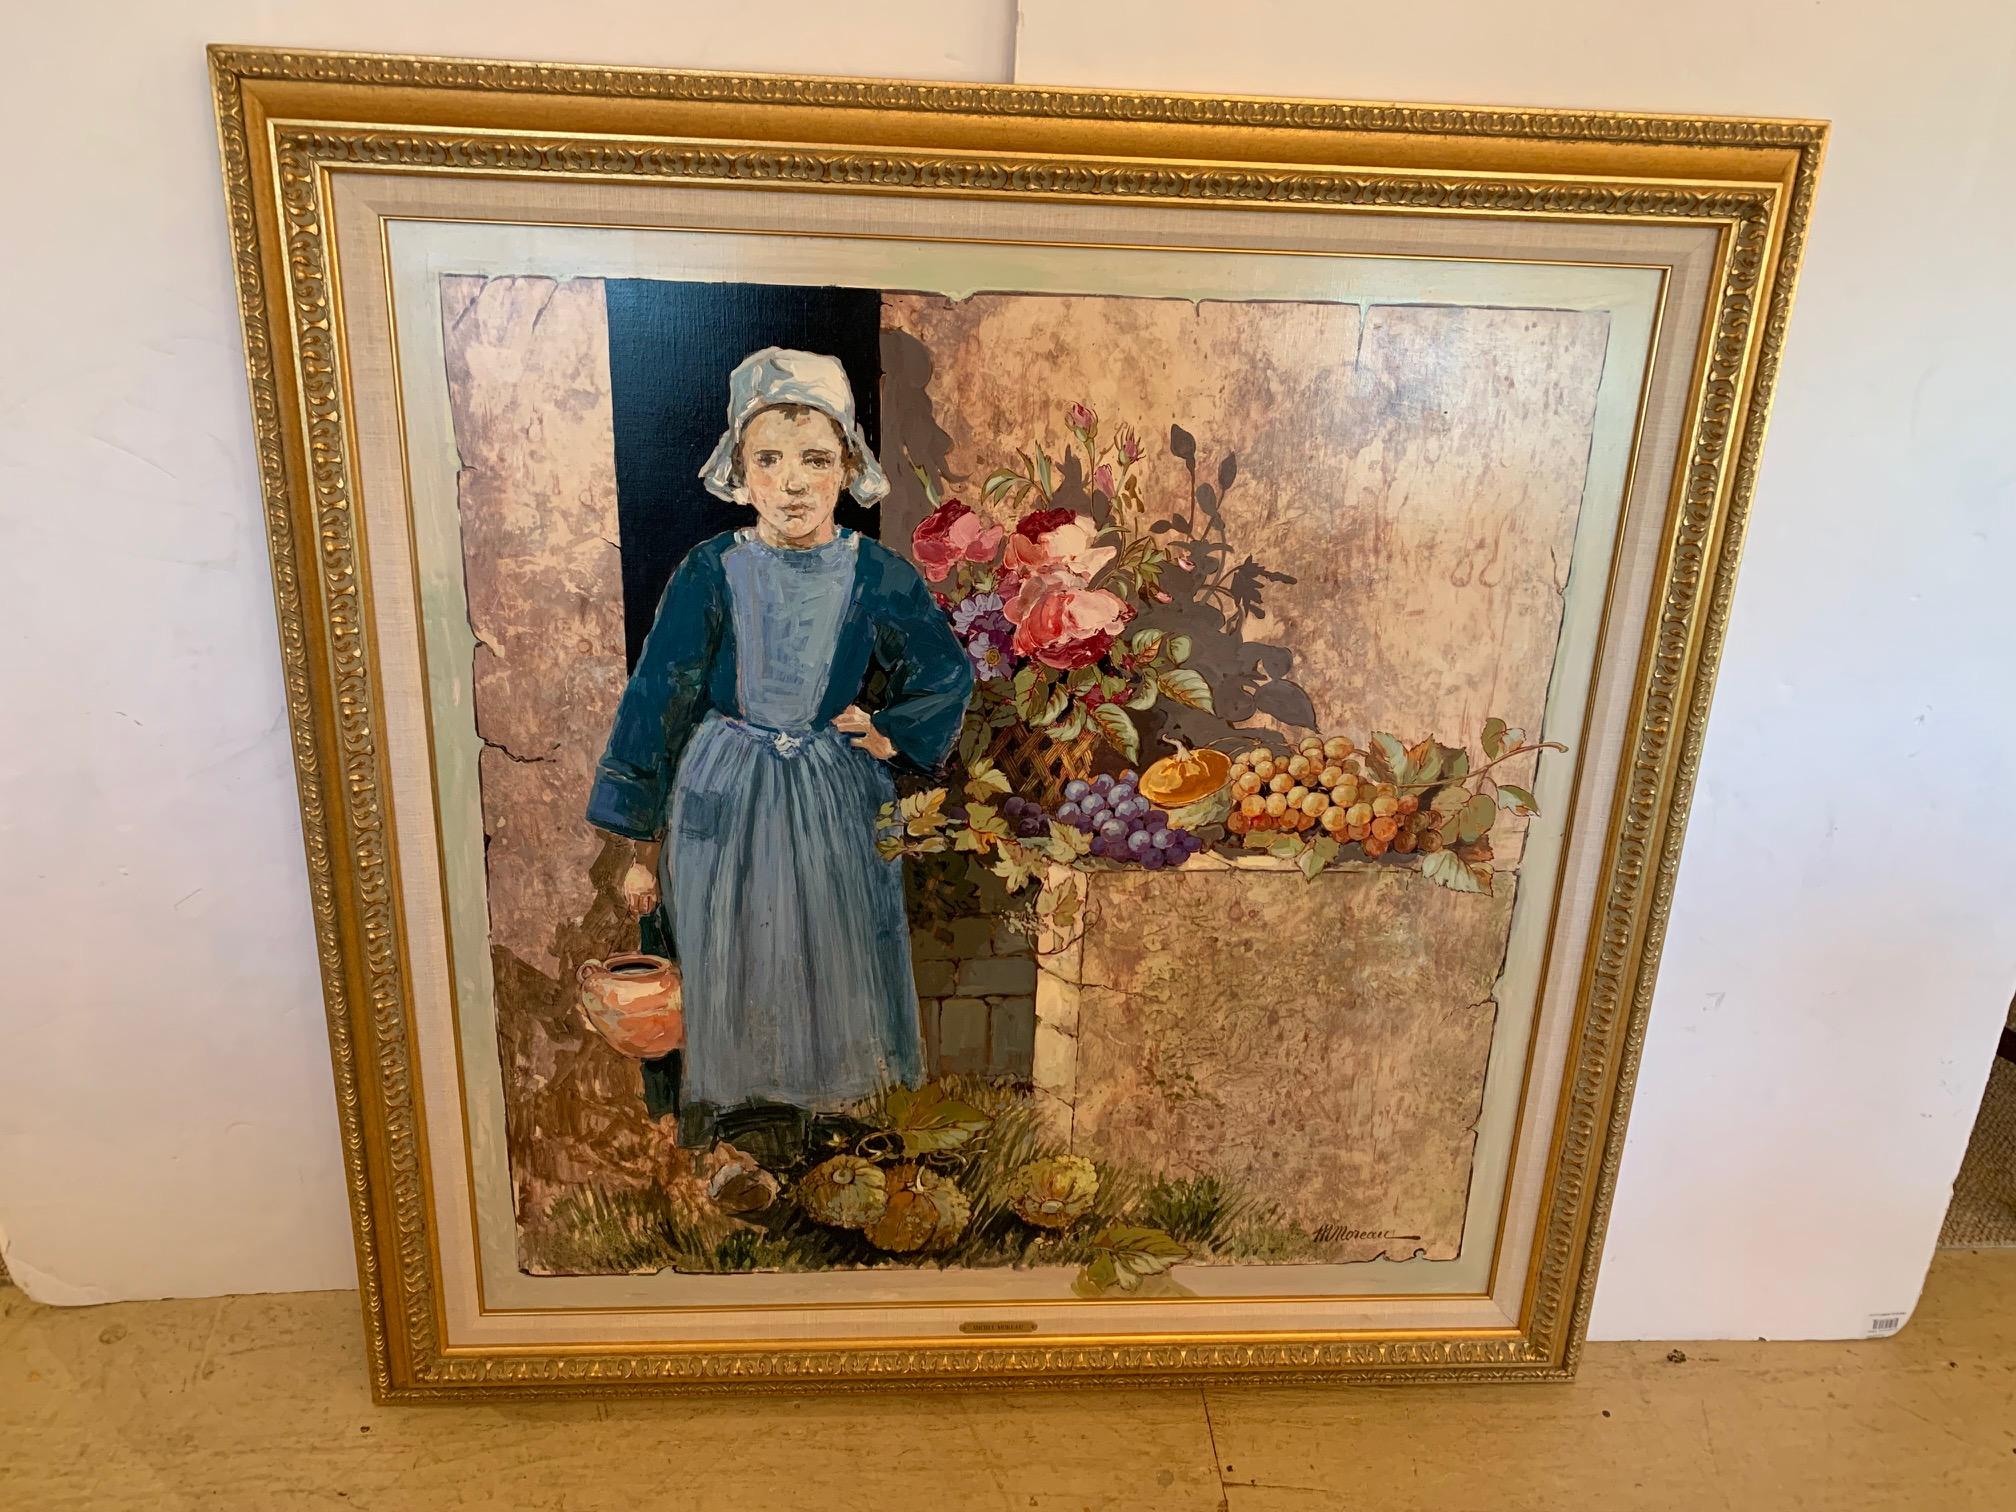 Impressive large portrait of a pretty farm girl with bonnet holding a basket and standing next to a harvest assortment of flowers and fruit. Artist brass plaque on the frame says Michel Moreau. Signed lower right.

Born April 25, 1940, in Angers,